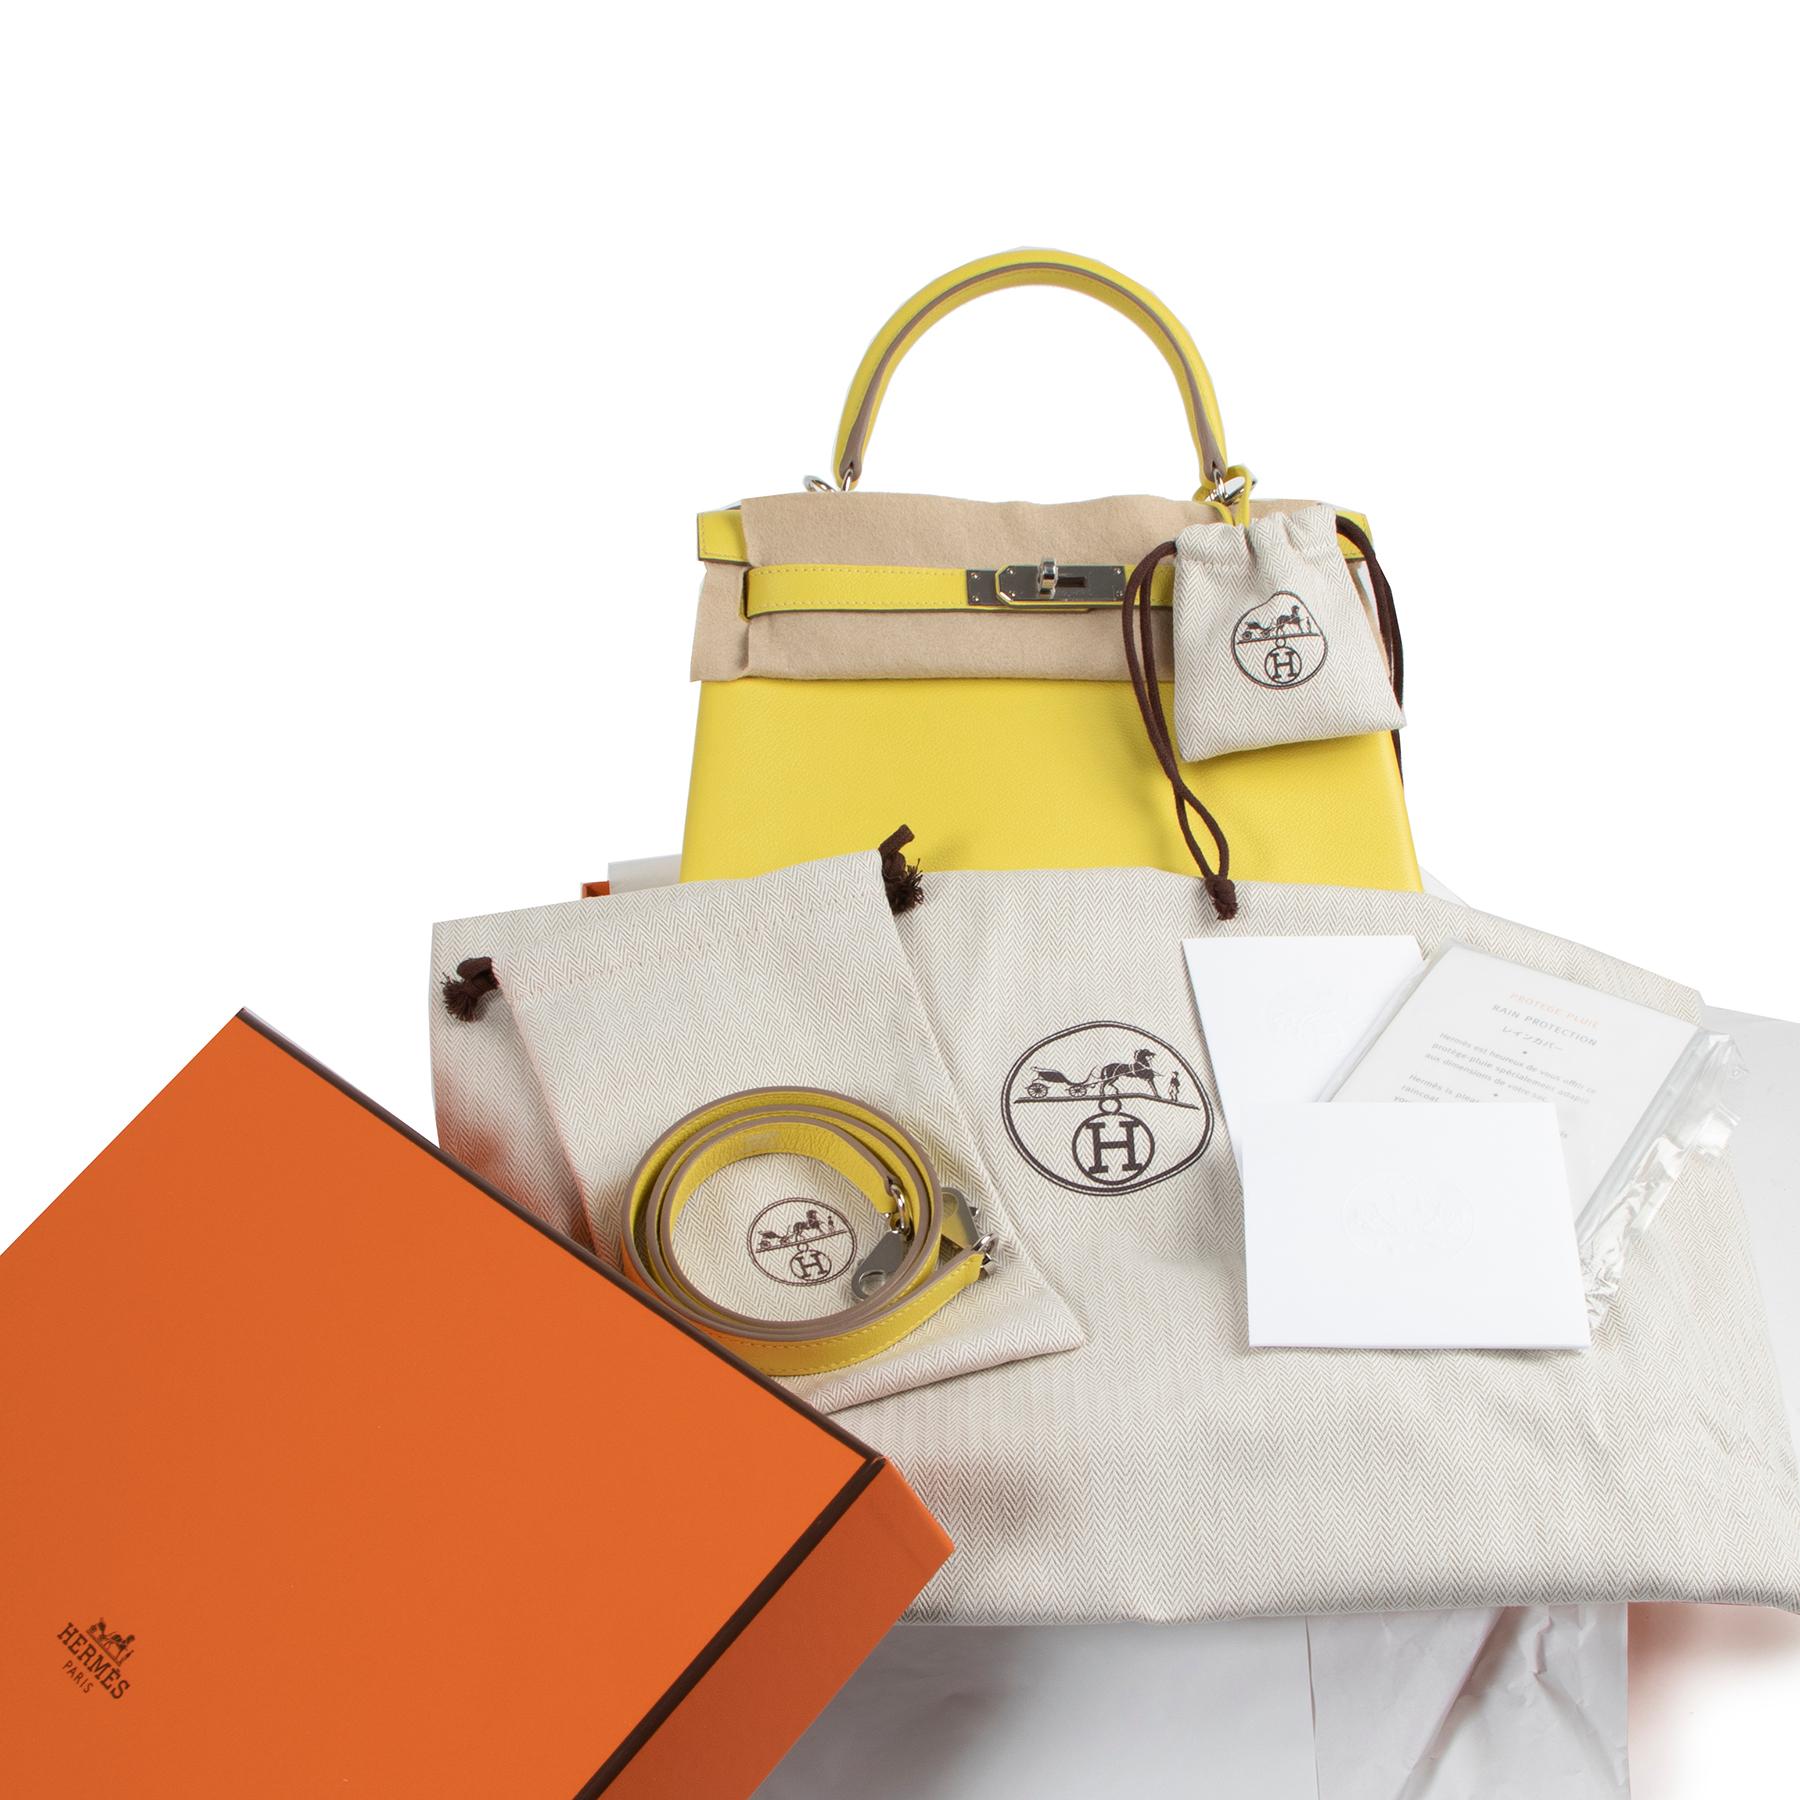 Brand New

Hermès Kelly 28 Lime Evercolor PHW

This stunning Hermès Kelly in the color Lime is a highly sought after collector's item. This bright and boldly colored Kelly in the size 28 is a must-have for any season. The silver toned hardware pairs